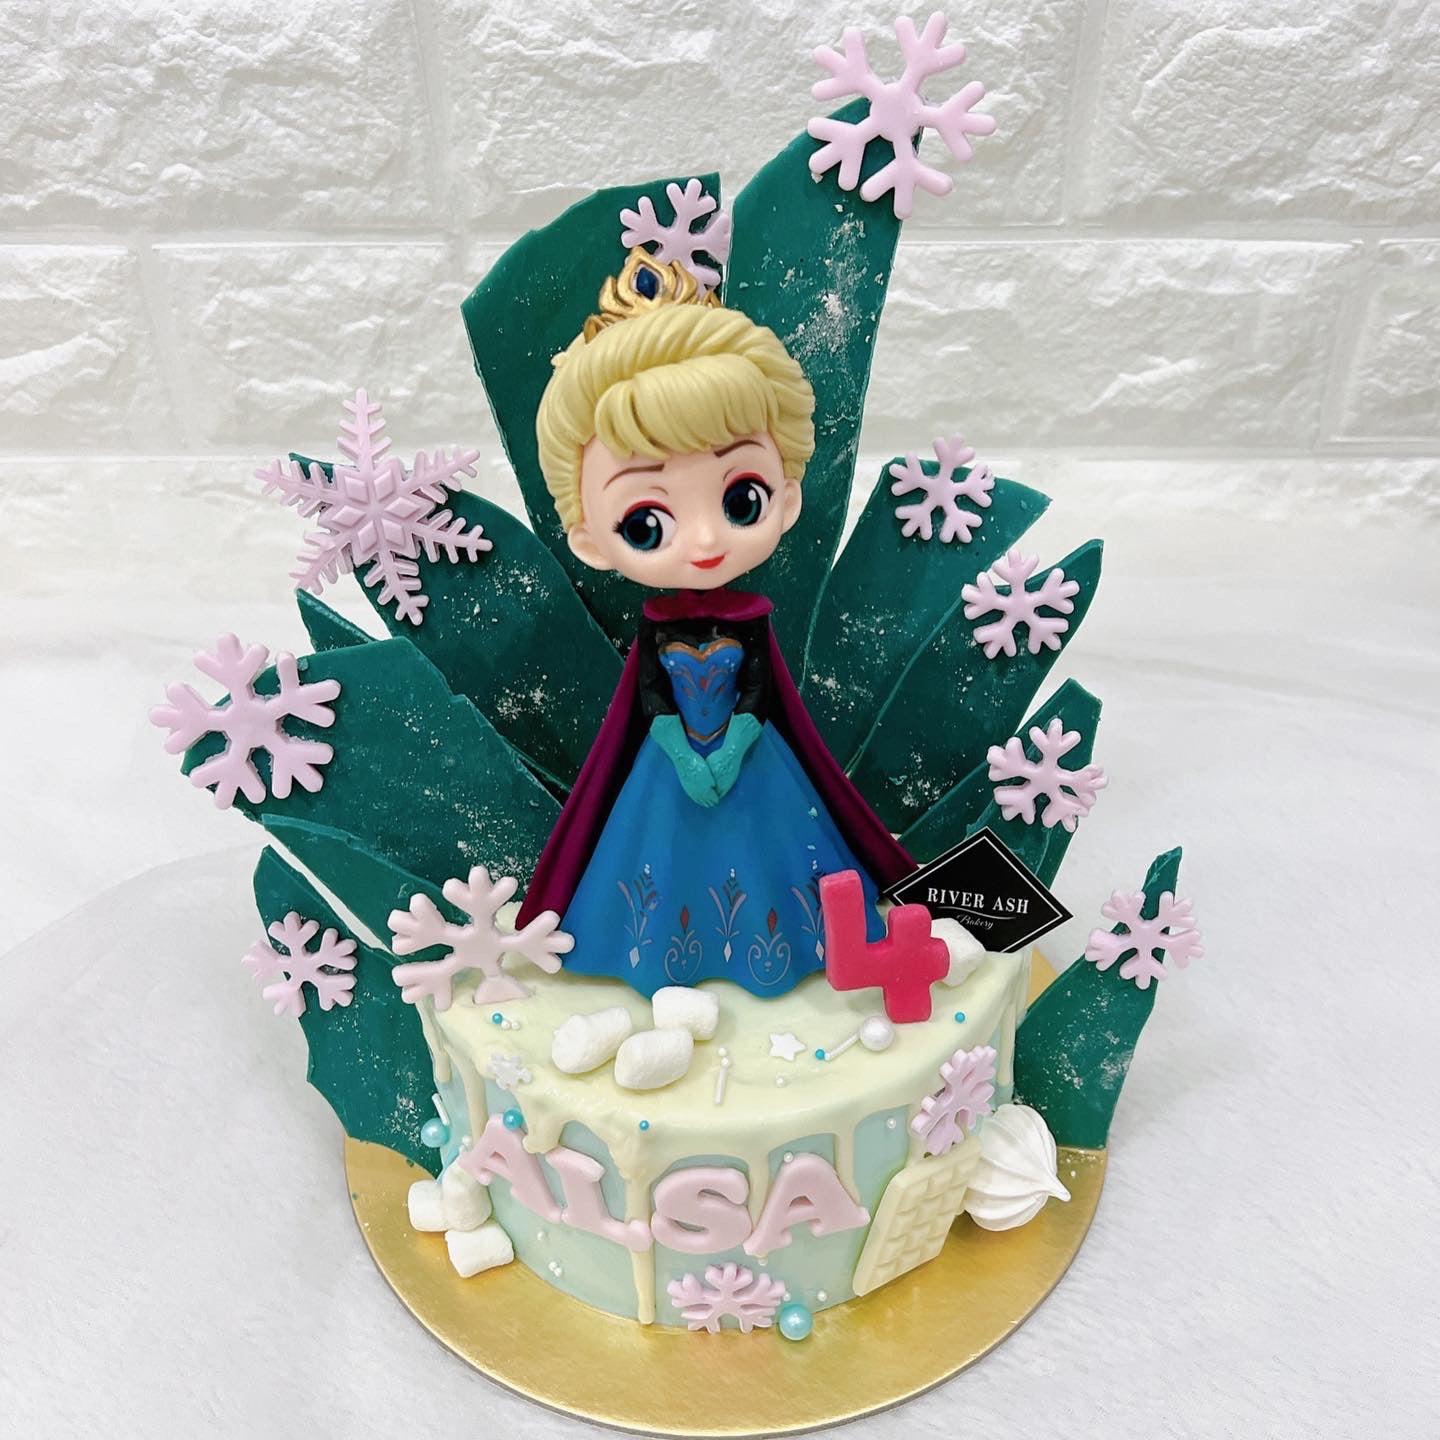 27 Unique Disney Princess Cakes You Can Order - Recommend.my